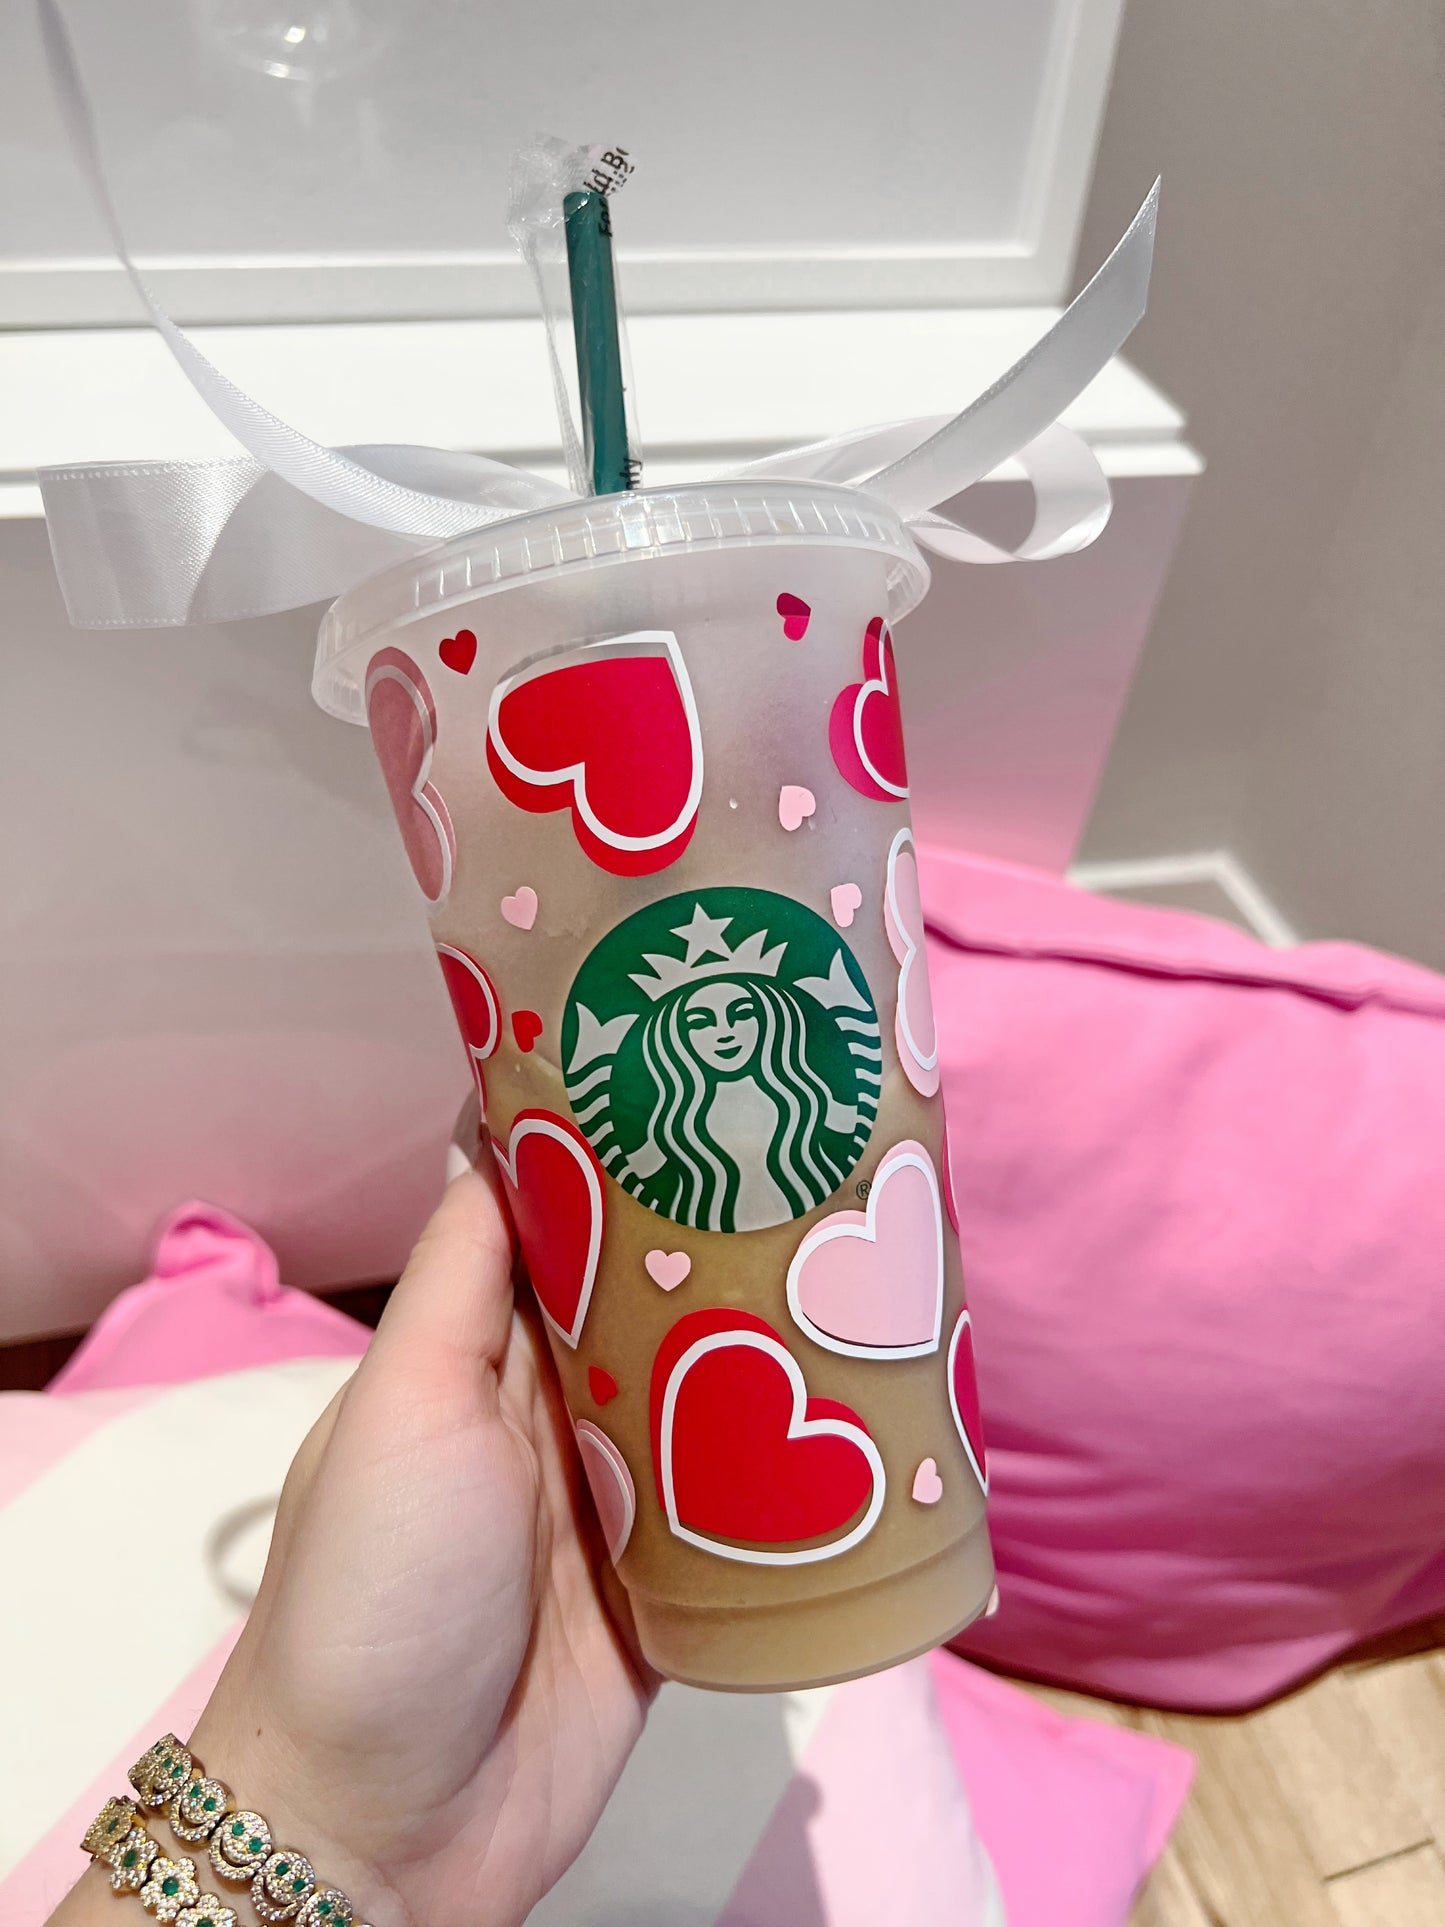 Heart (Cold Cup)